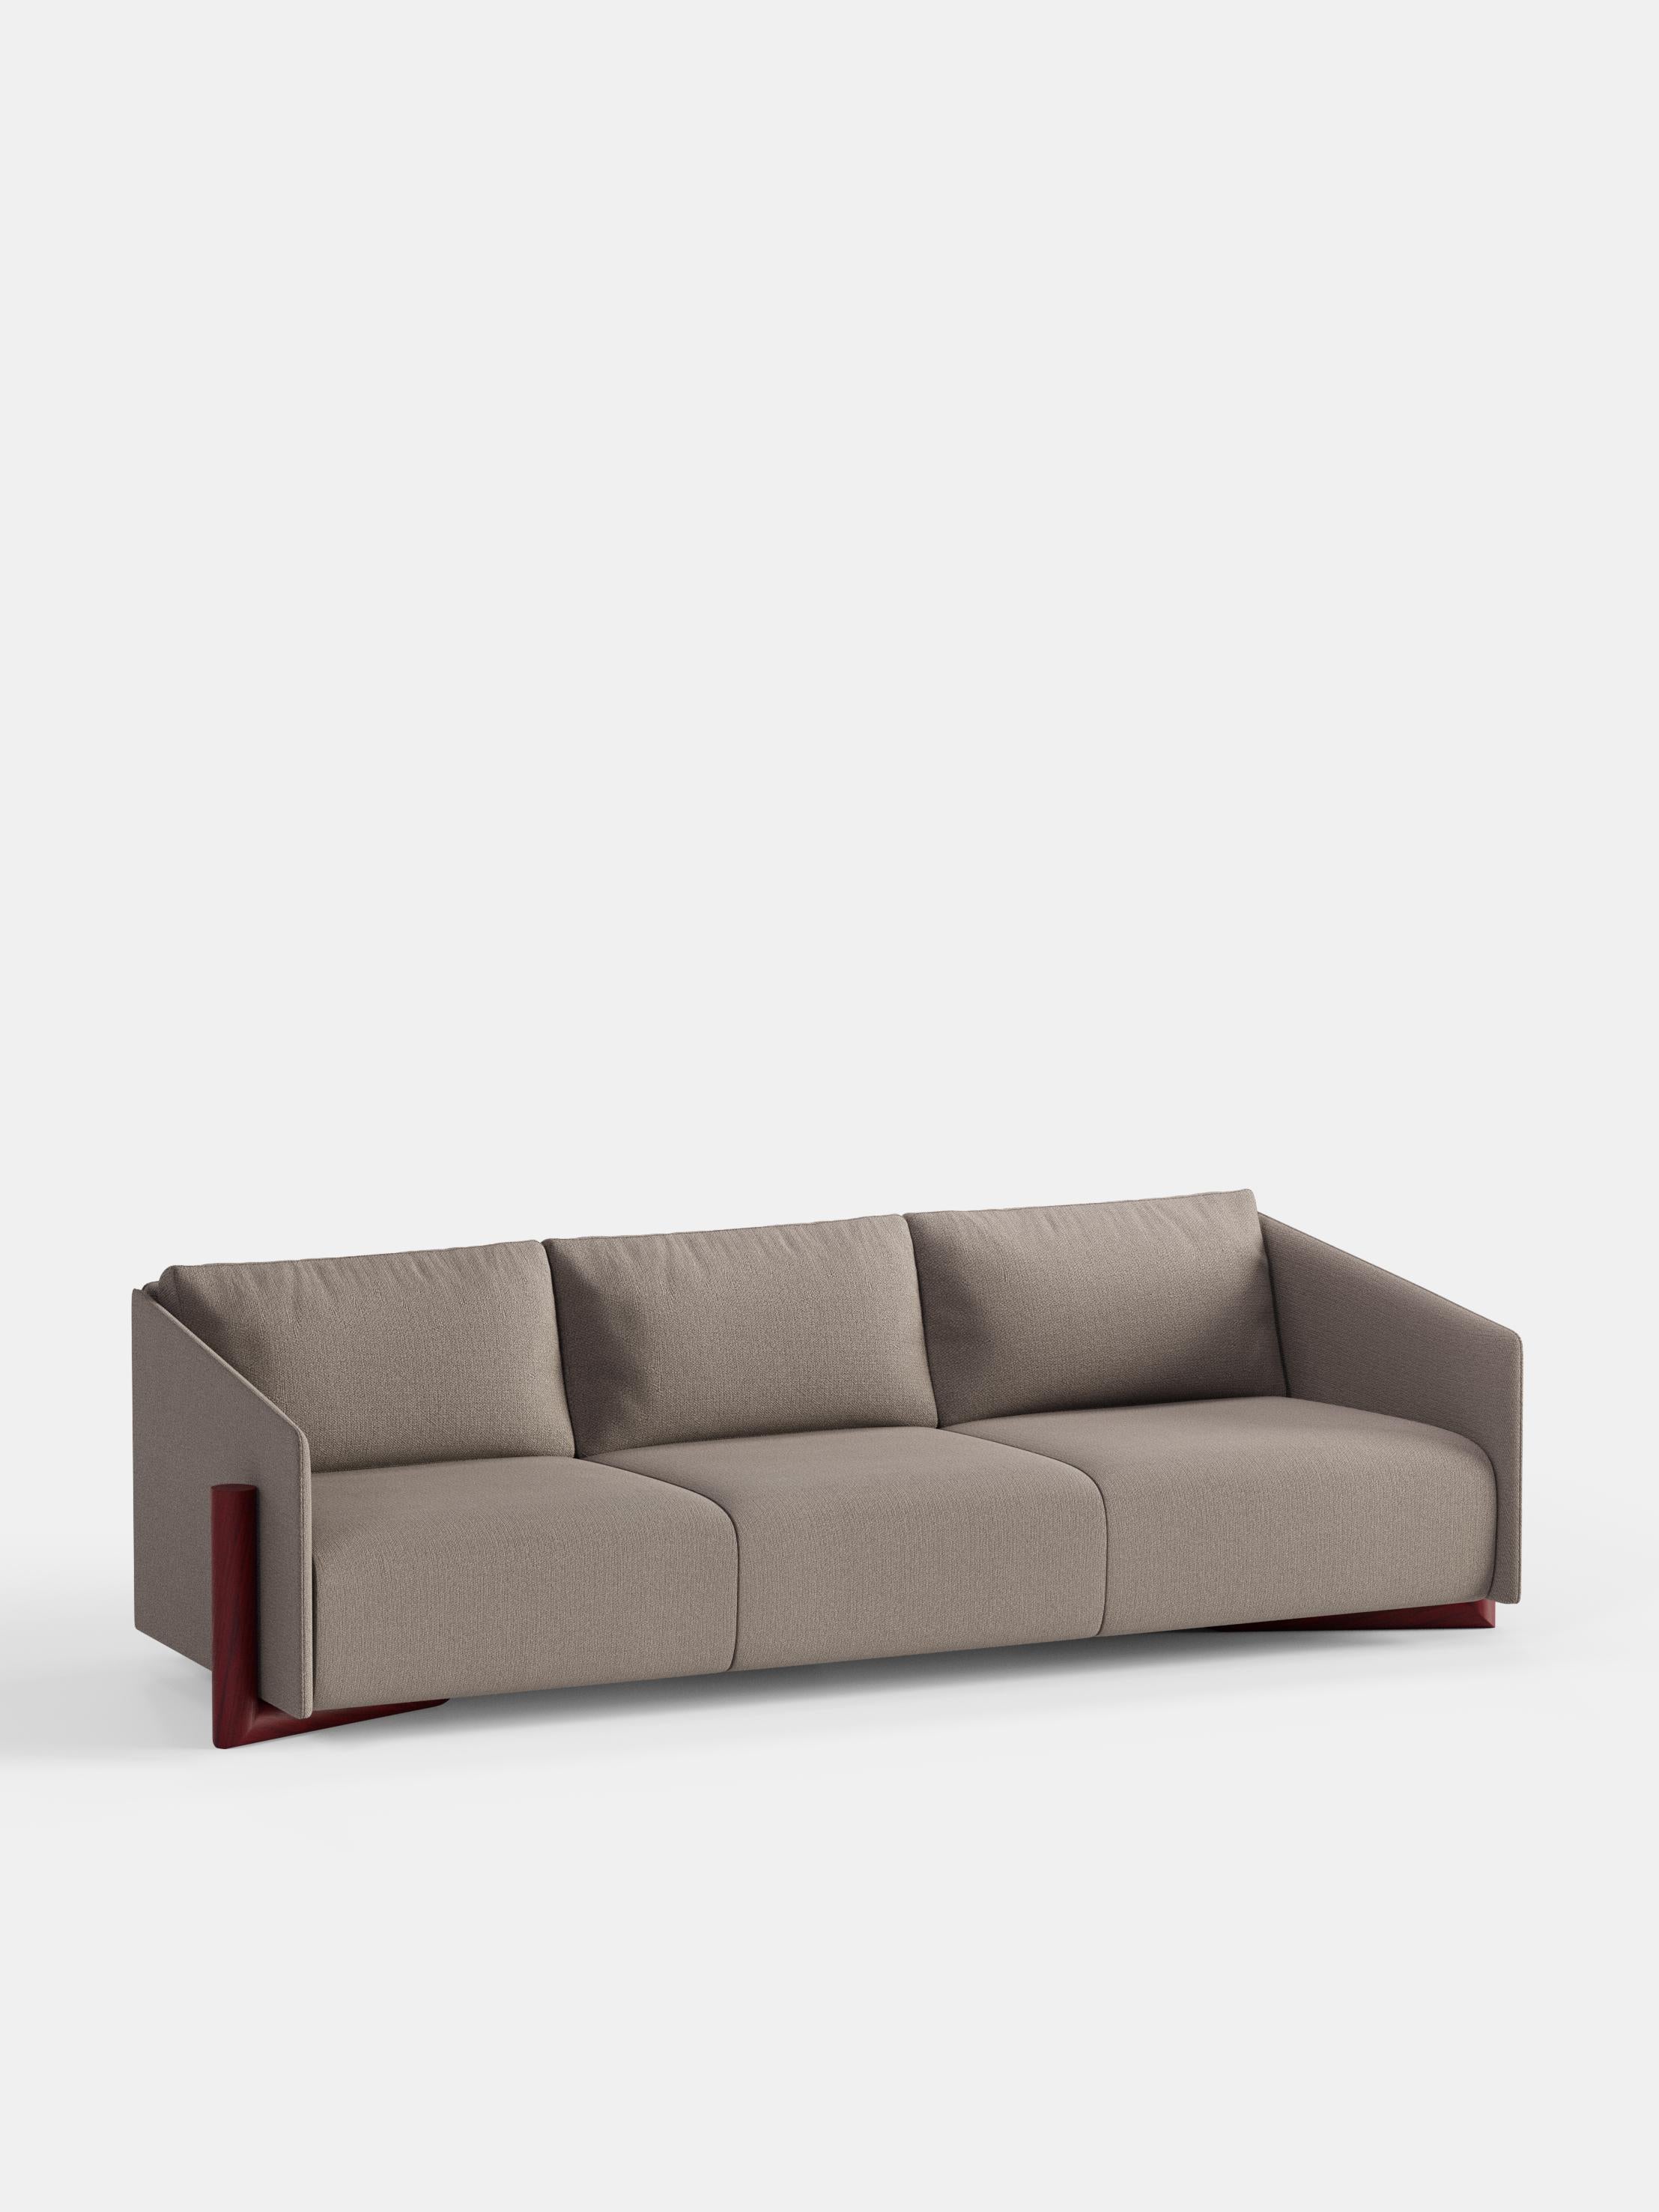 Taupe Grey Timber 4 Seater Sofa by Kann Design
Dimensions: D 104.5 x W 260 x H 75 cm.
Materials: Solid wood, elastic belts, HR foam, fabric upholstery Kvadrat Vidar 143 (94% wool, 6% nylon).
Available in other fabrics.

The strong presence of